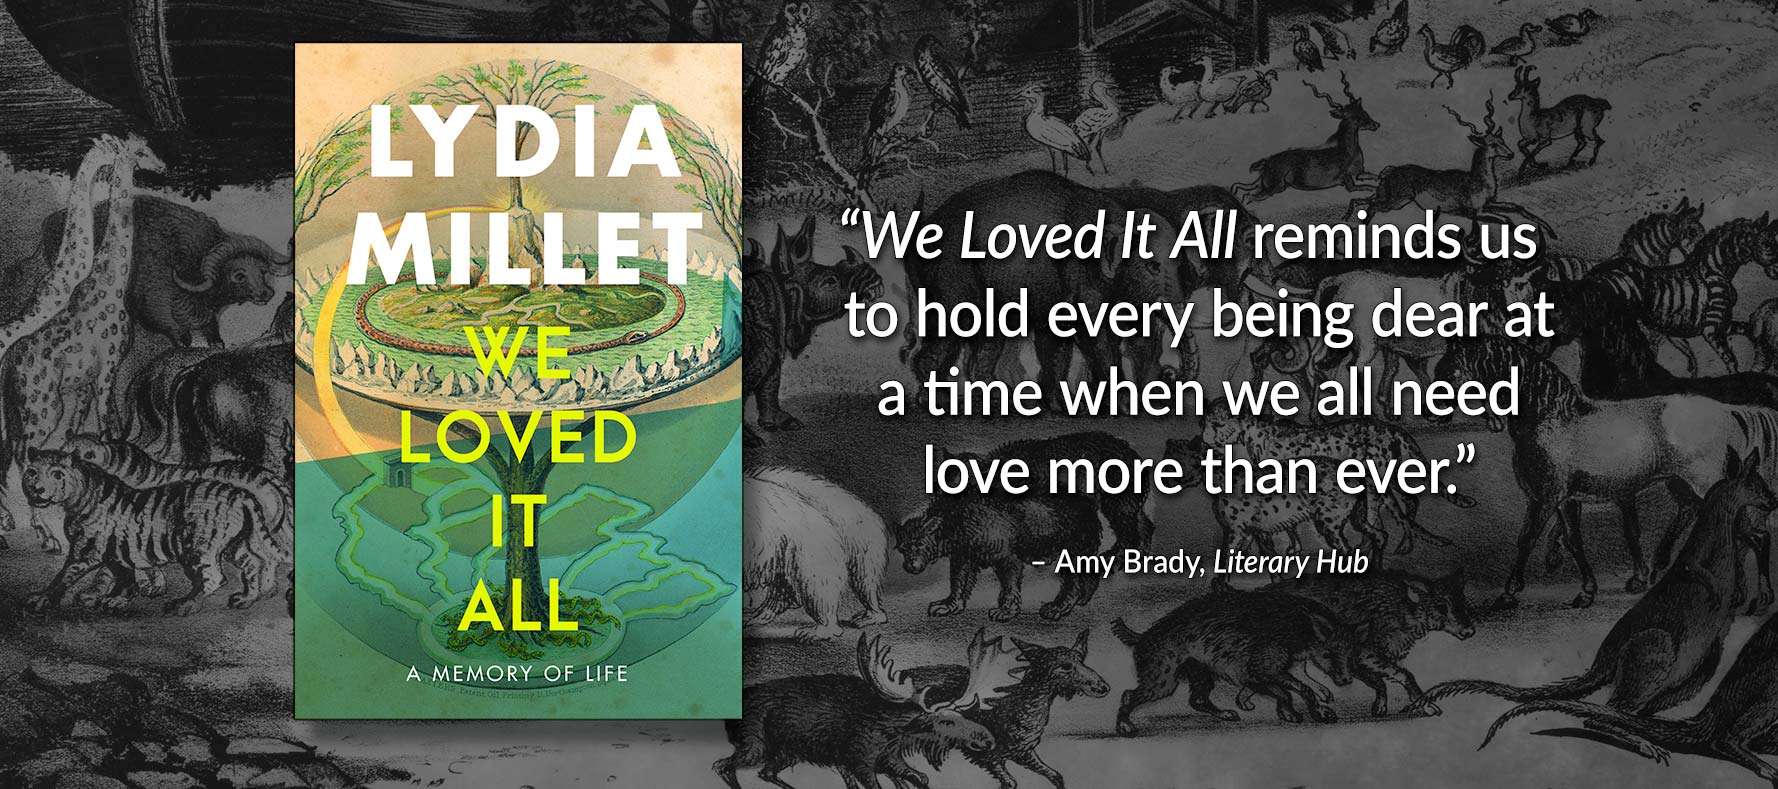 Cover art for Lydia's new non-fiction book, We Loved It All, and a quote by Amy Brady of LiteraryHub.com